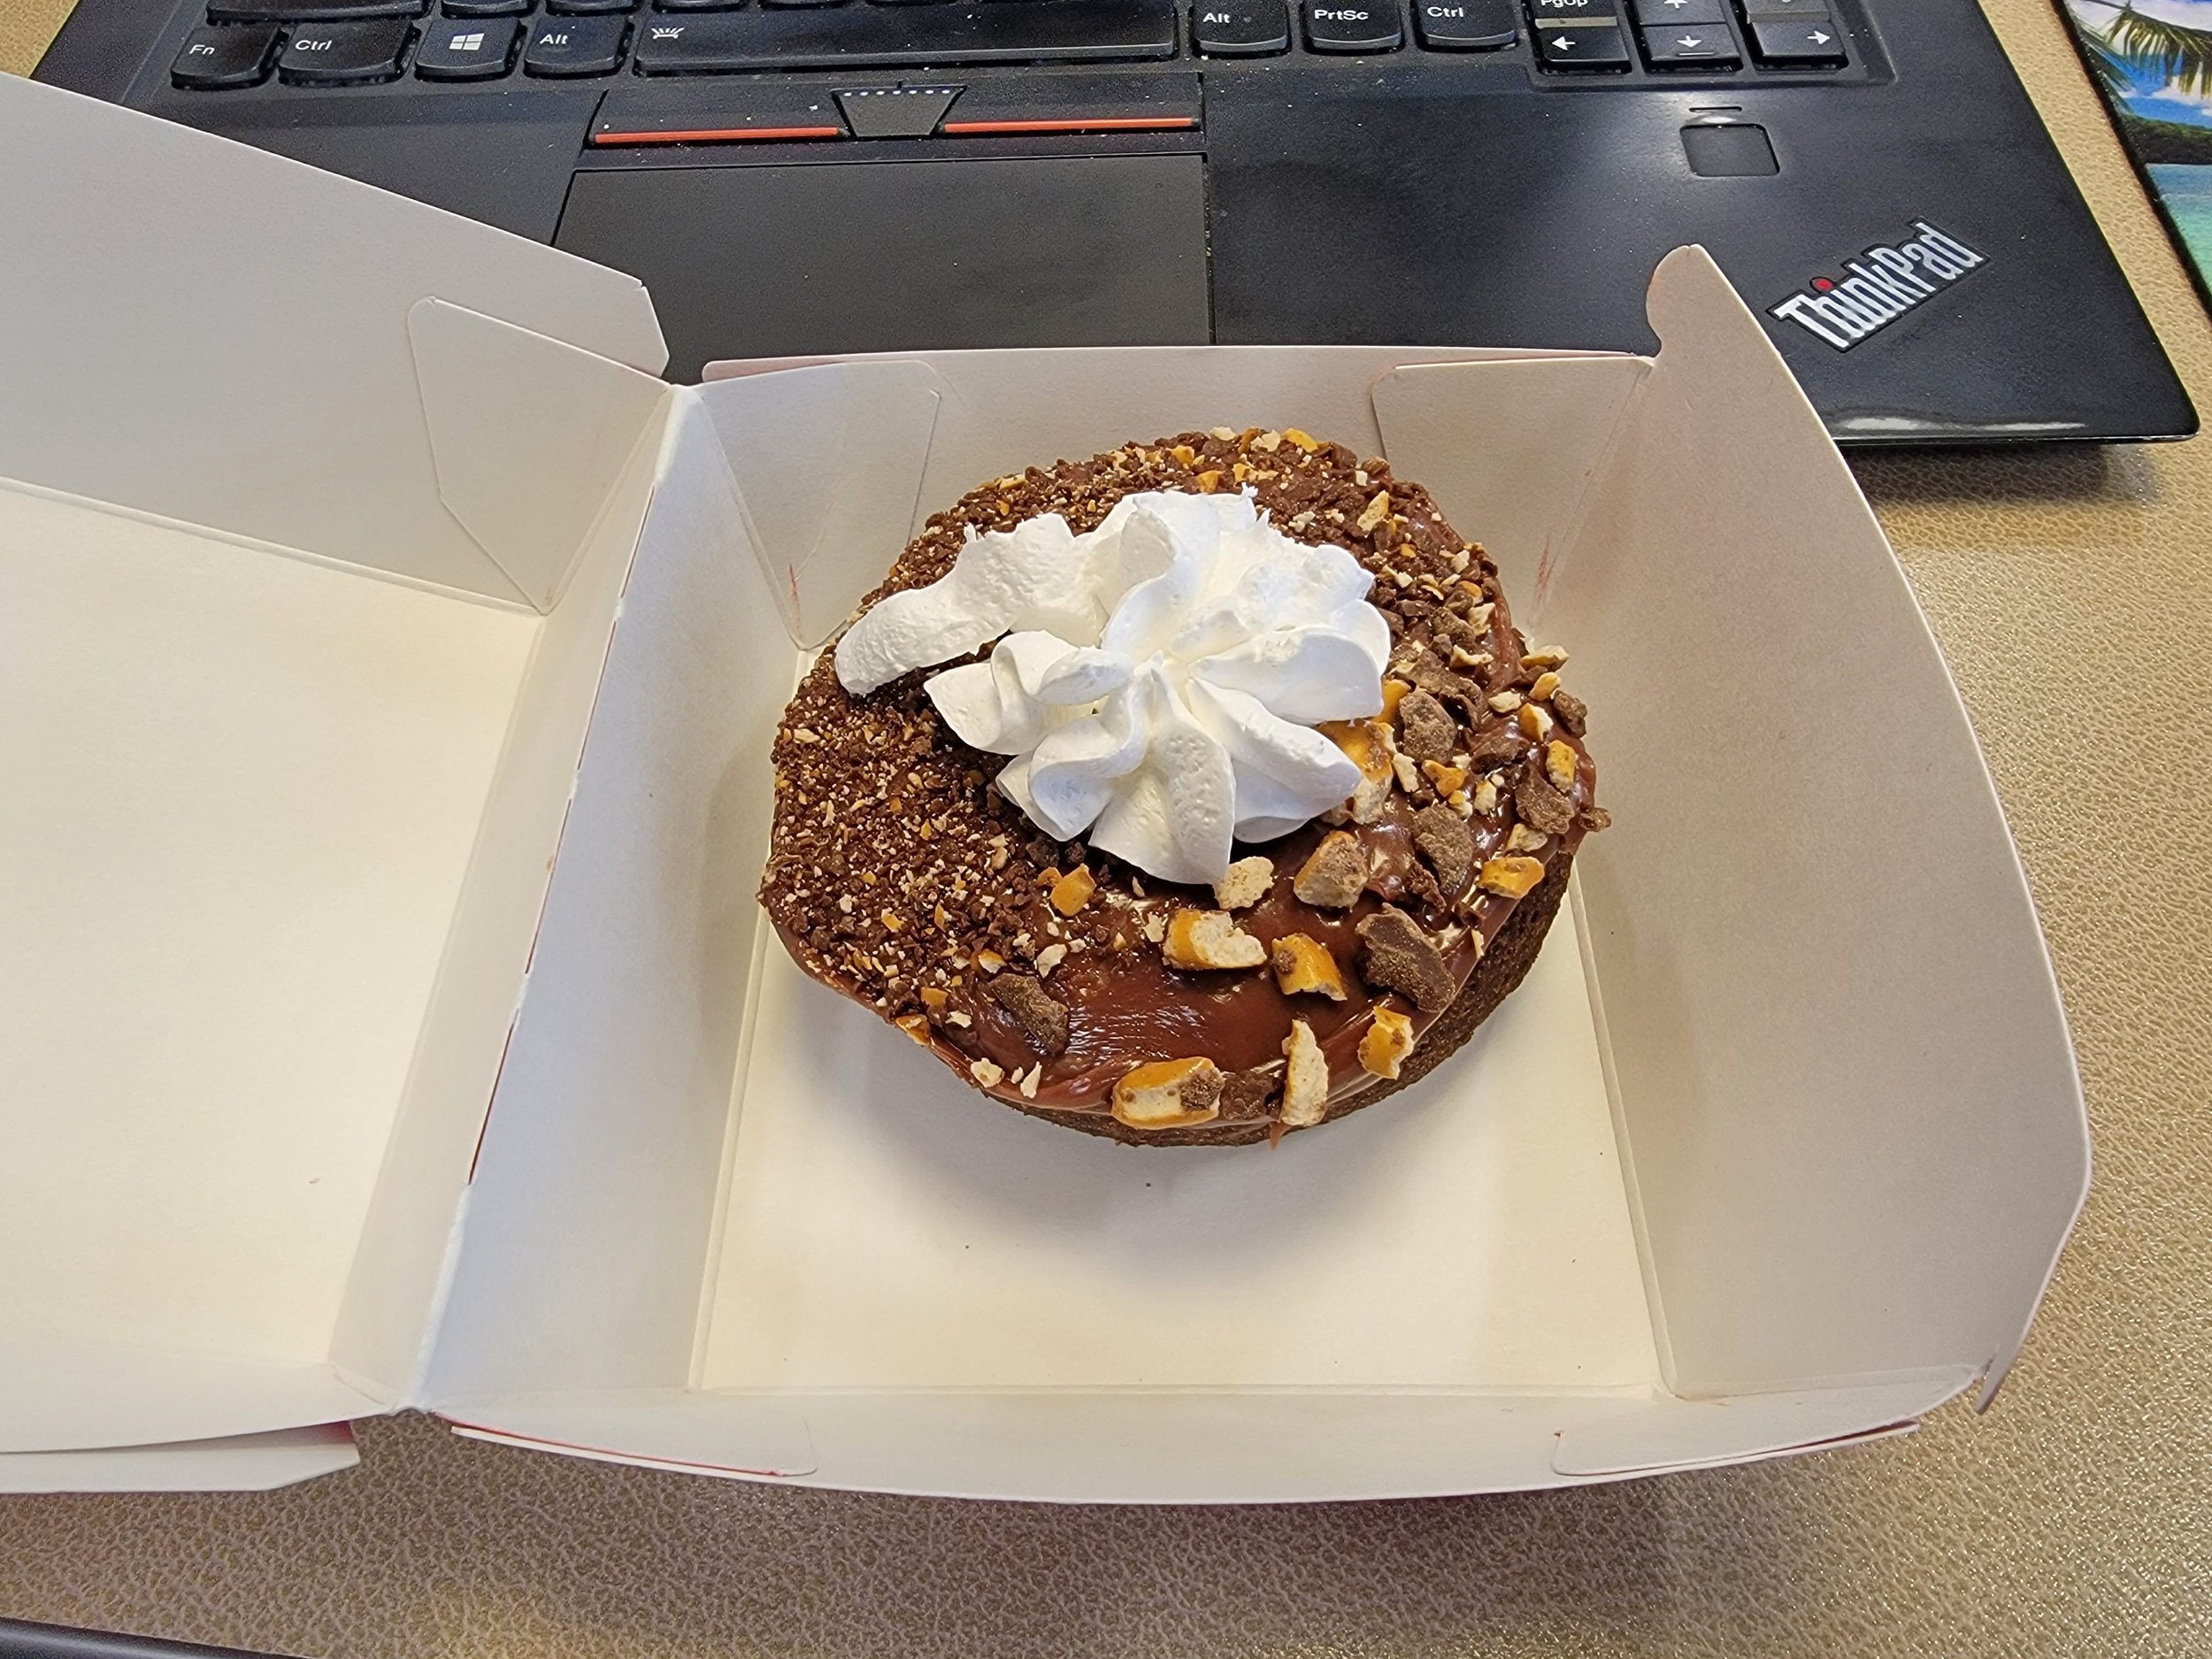 Tim has a new donut for me. Brownie pretzel thing on chocolate cake donut. 7/10